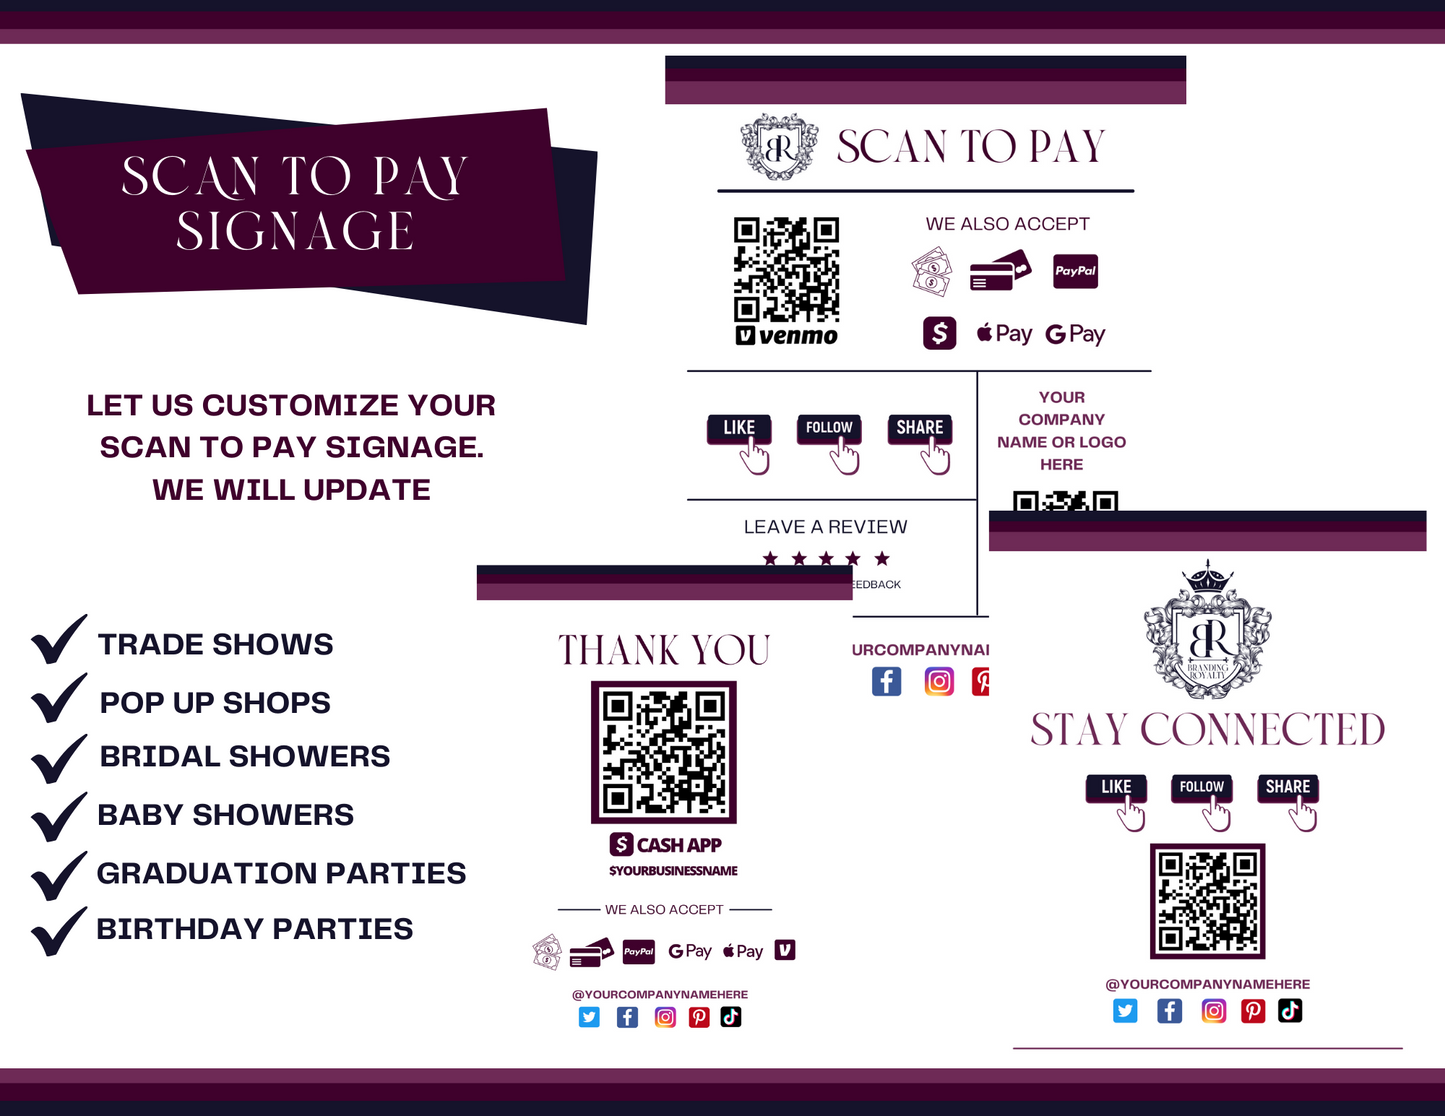 Custom digital business cards with QR code for small business owners and organizations. For personal or business use.